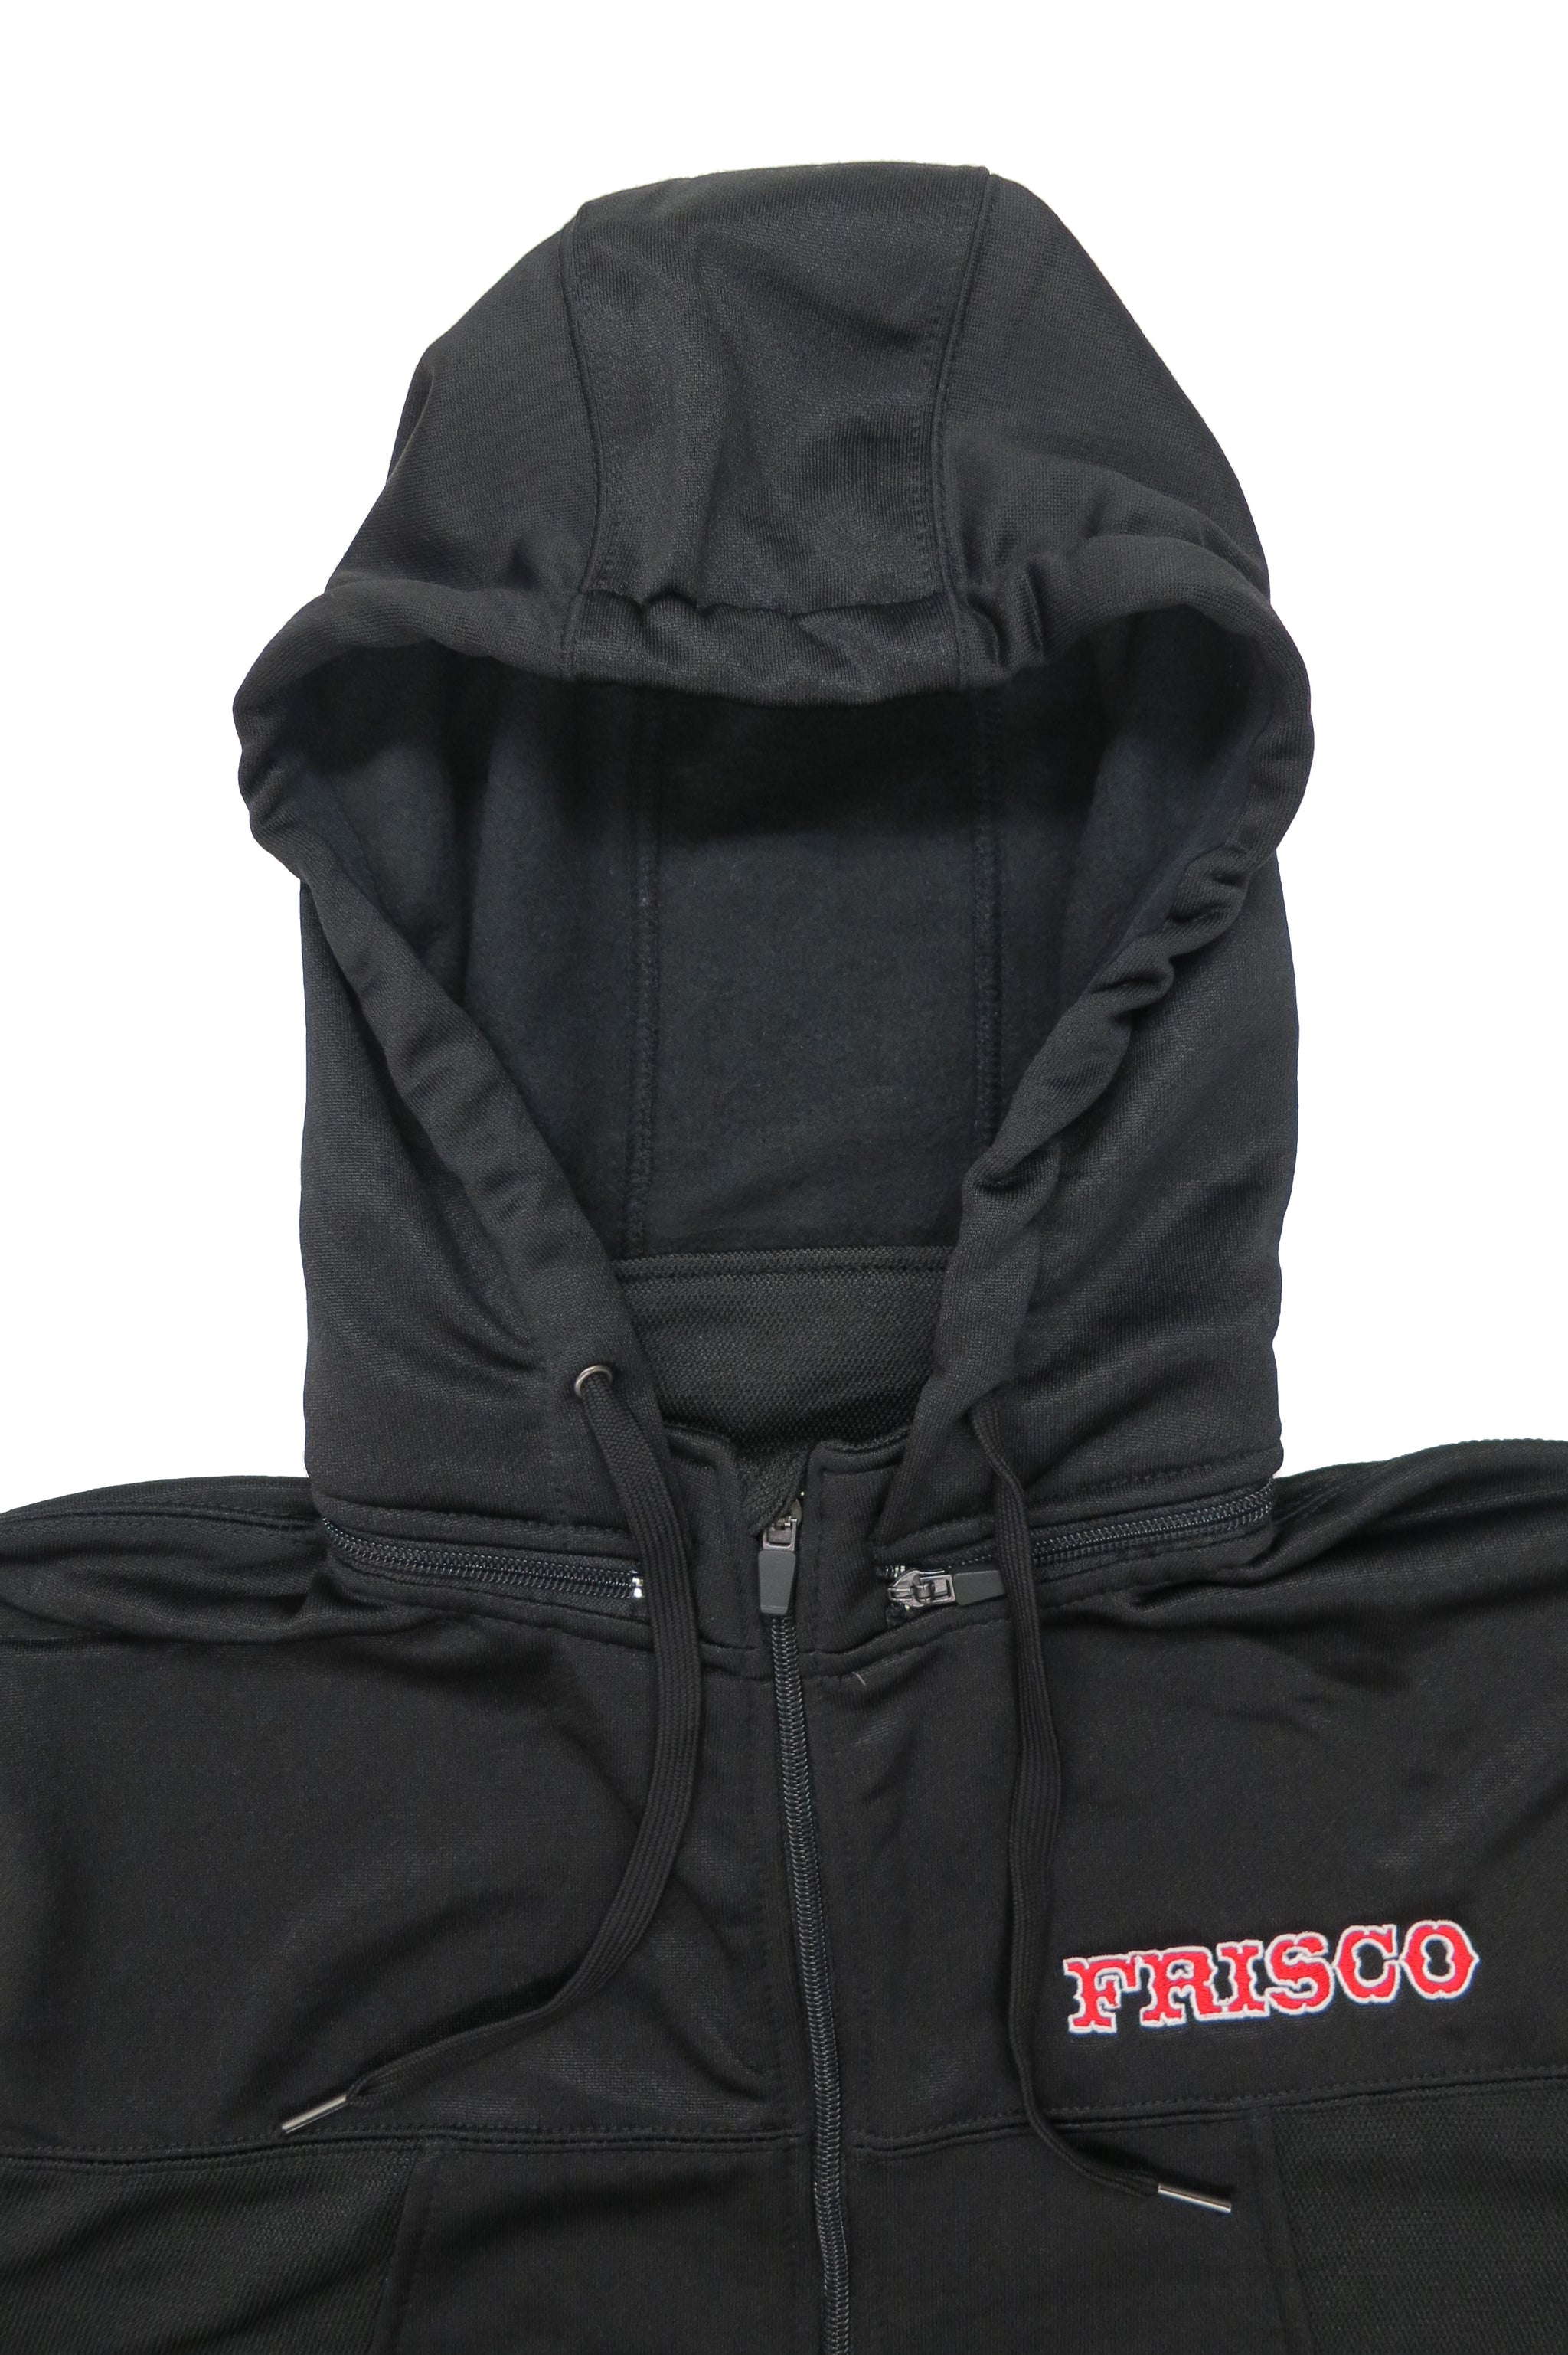 Frisco Hooded Zipper Sweatshirt with Removable Hood - 415 Clothing